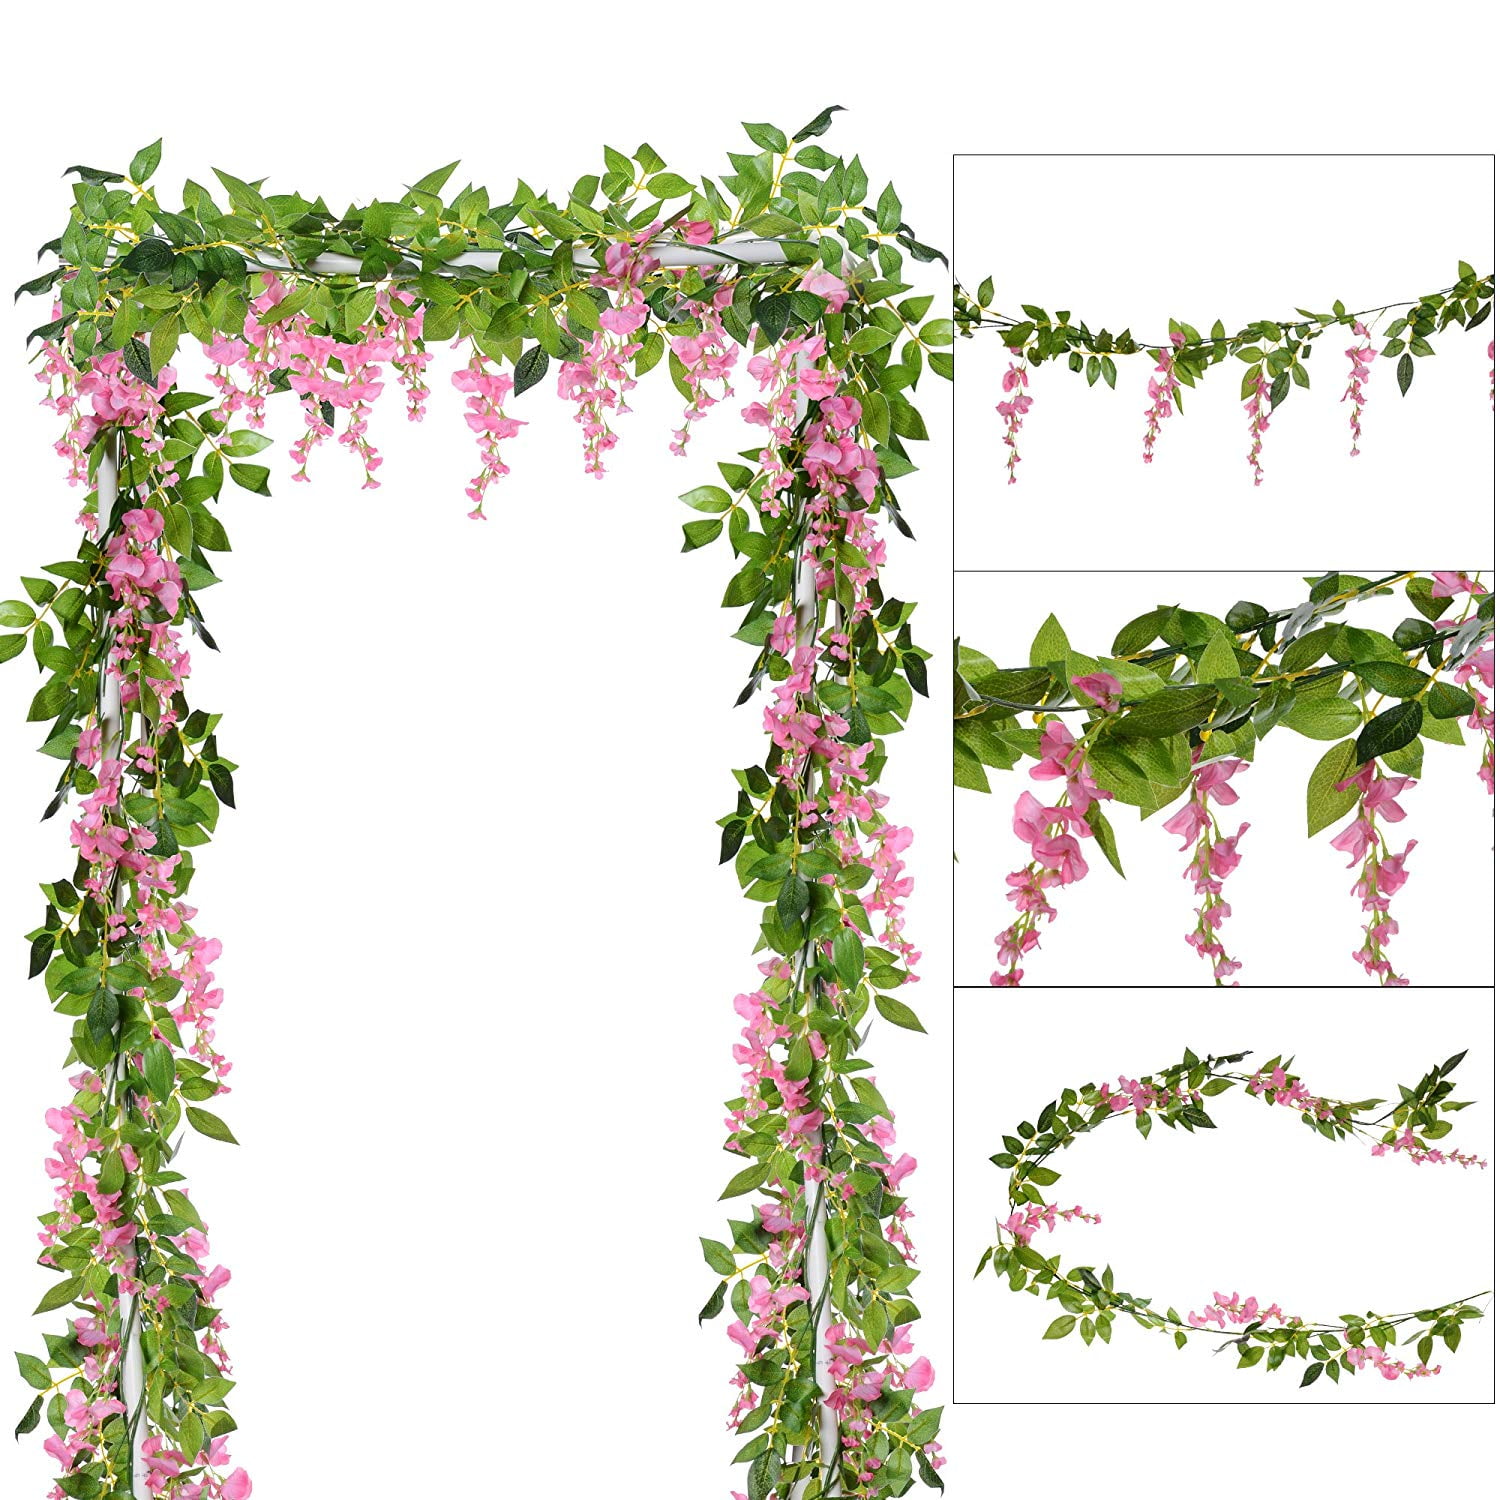 YSBER 6 Piece /12 Piece 3.6 Feet Artificial Fake Wisteria Vine Rattan Yard and Wedding ArtificialVines_Green12PC03 12PCS, Green Hanging Silk Flowers String for Home Party